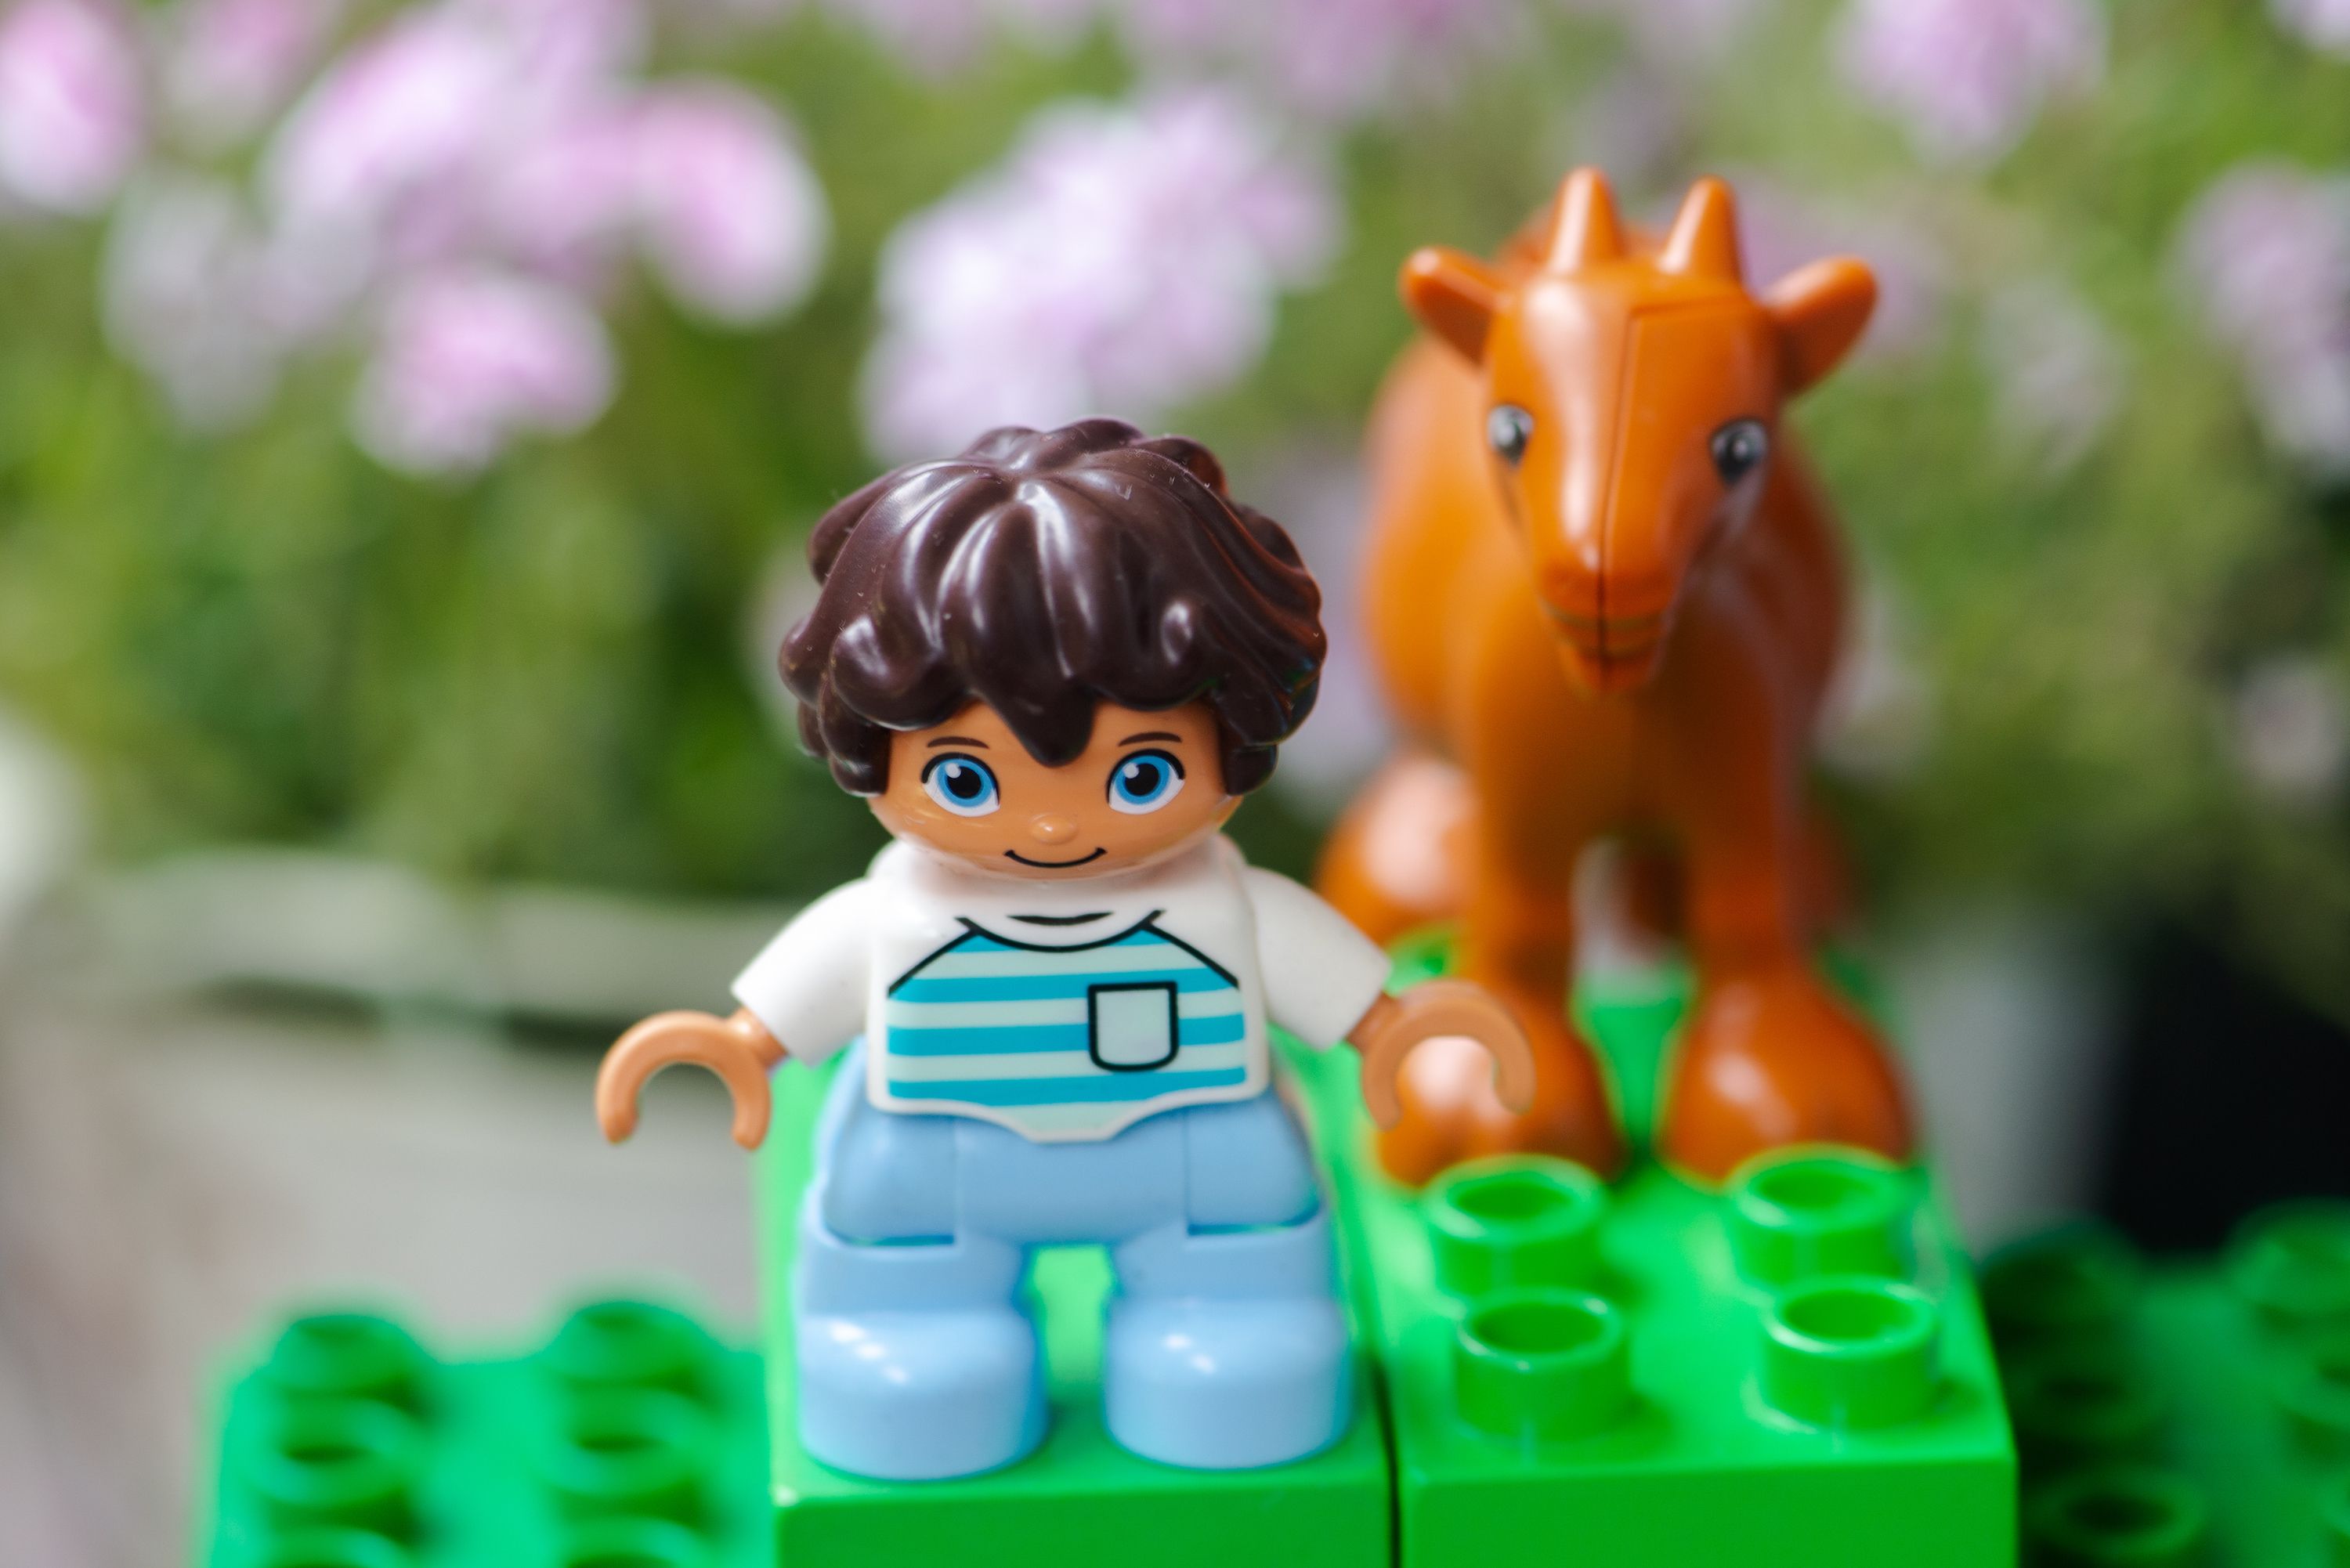 Lego Duplo child mini figure with a goat with flowers in the background